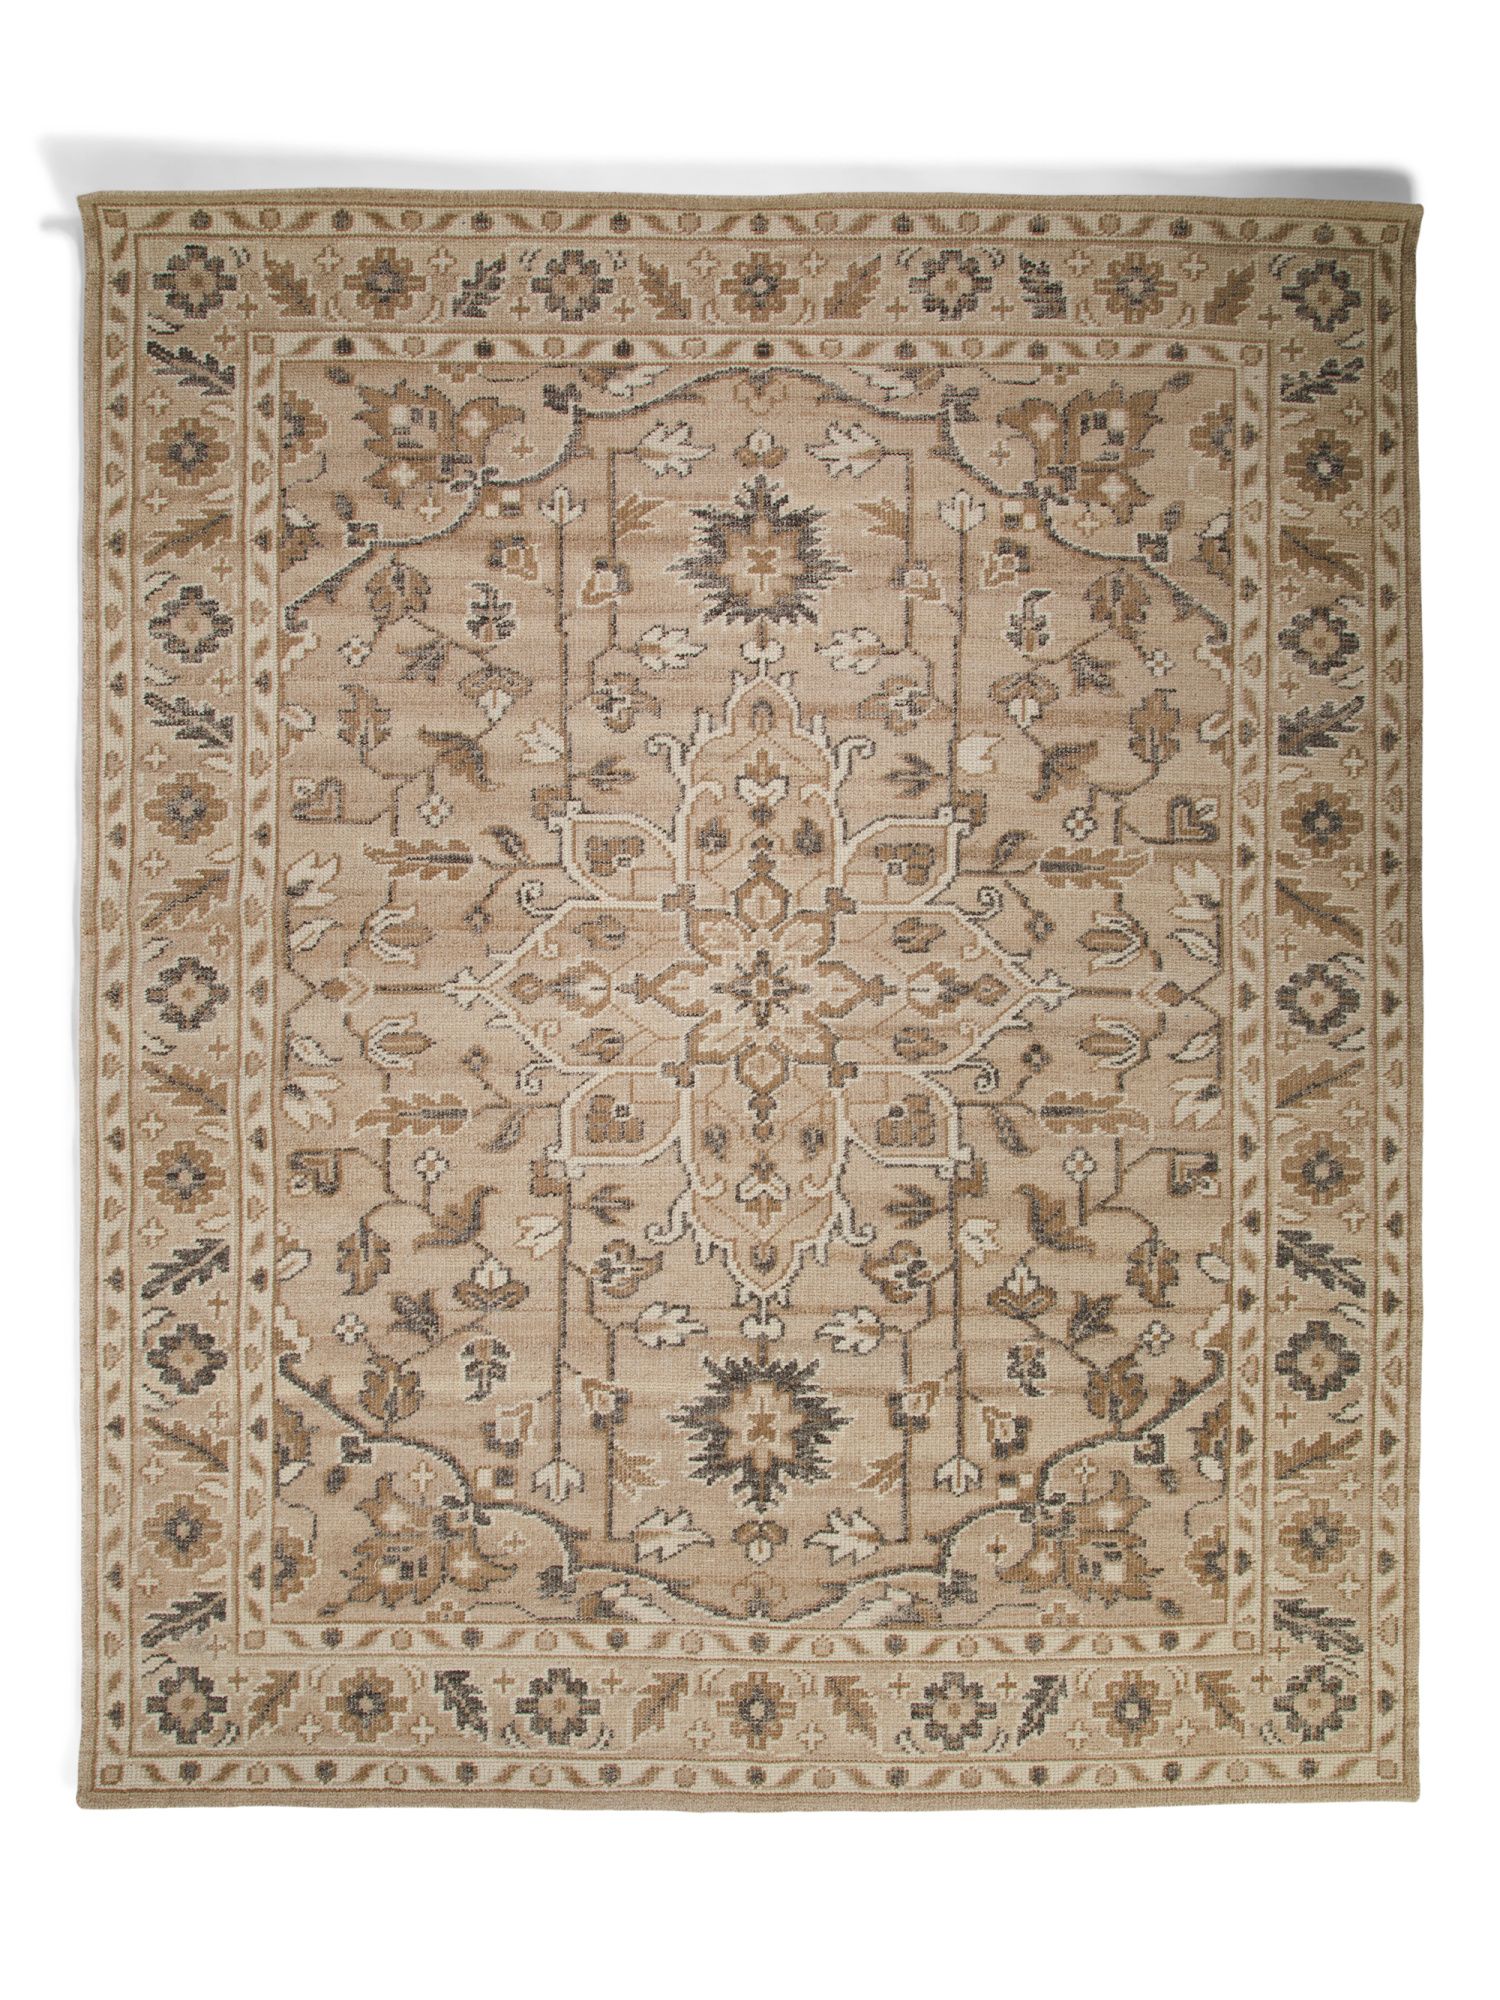 8x10 Hand Knotted Wool Rug | TJ Maxx